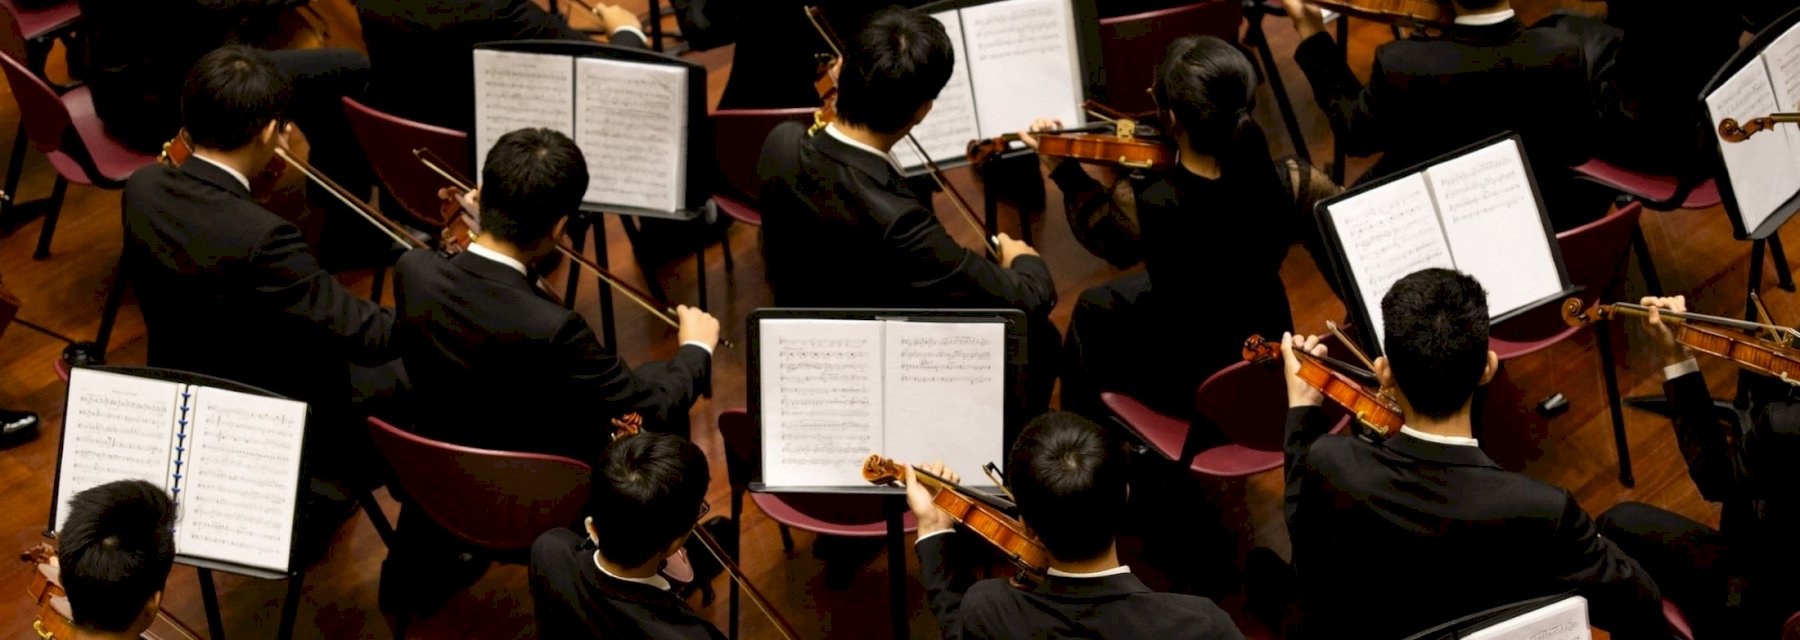 5 delightful classical concerts to enjoy in London this winter